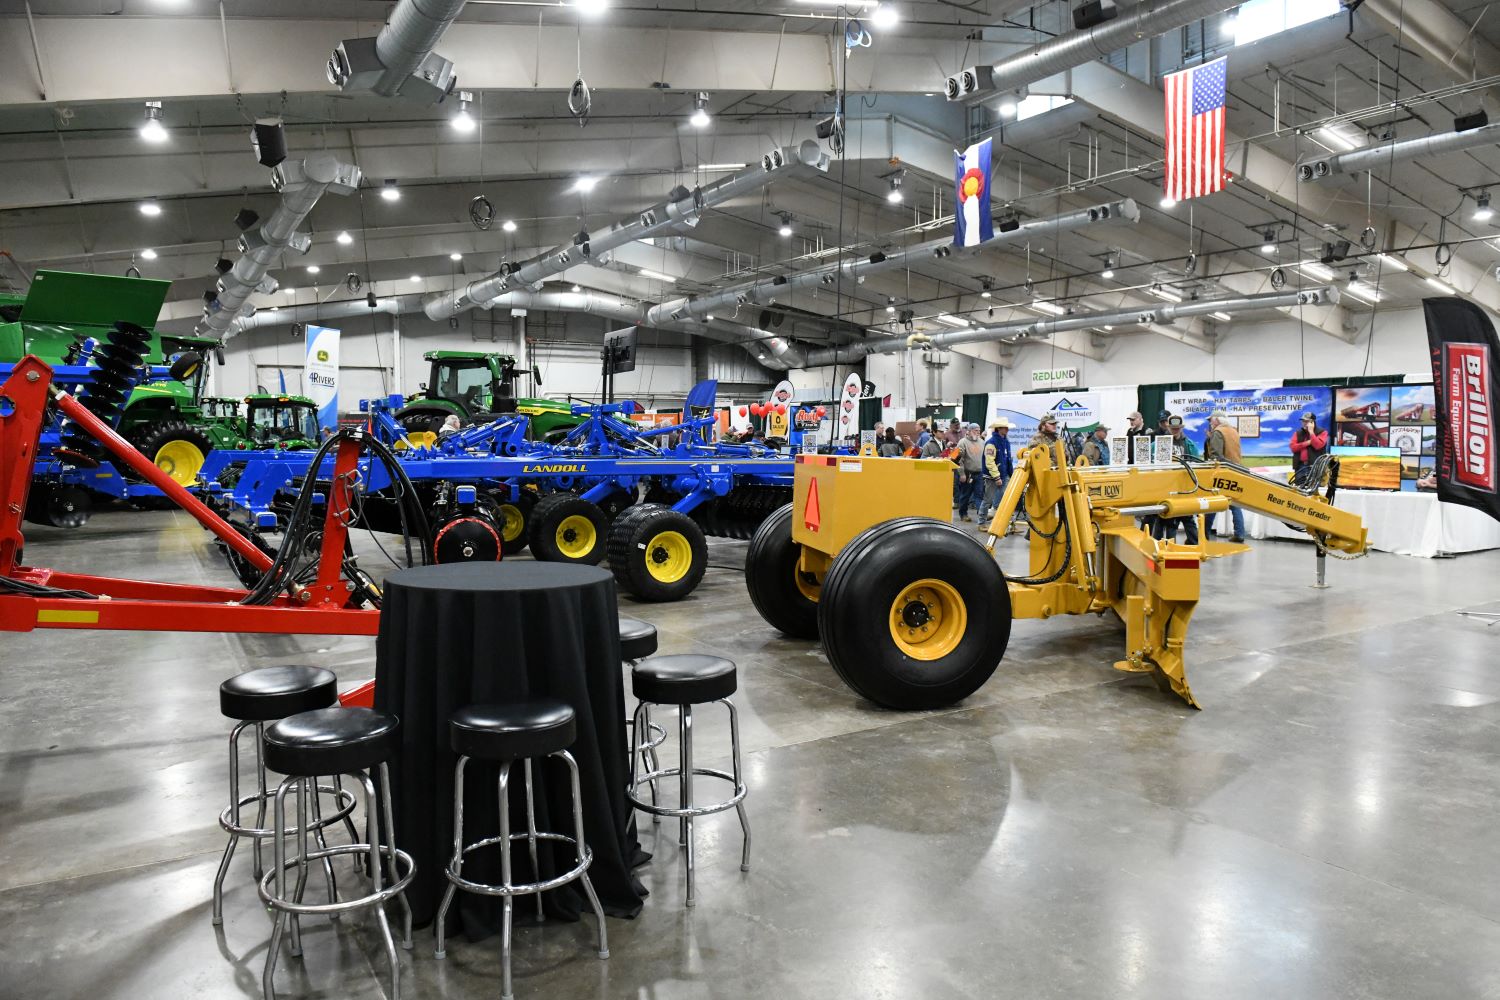 A brightly lit indoor arena full of rows and rows of large-scale farm equipment